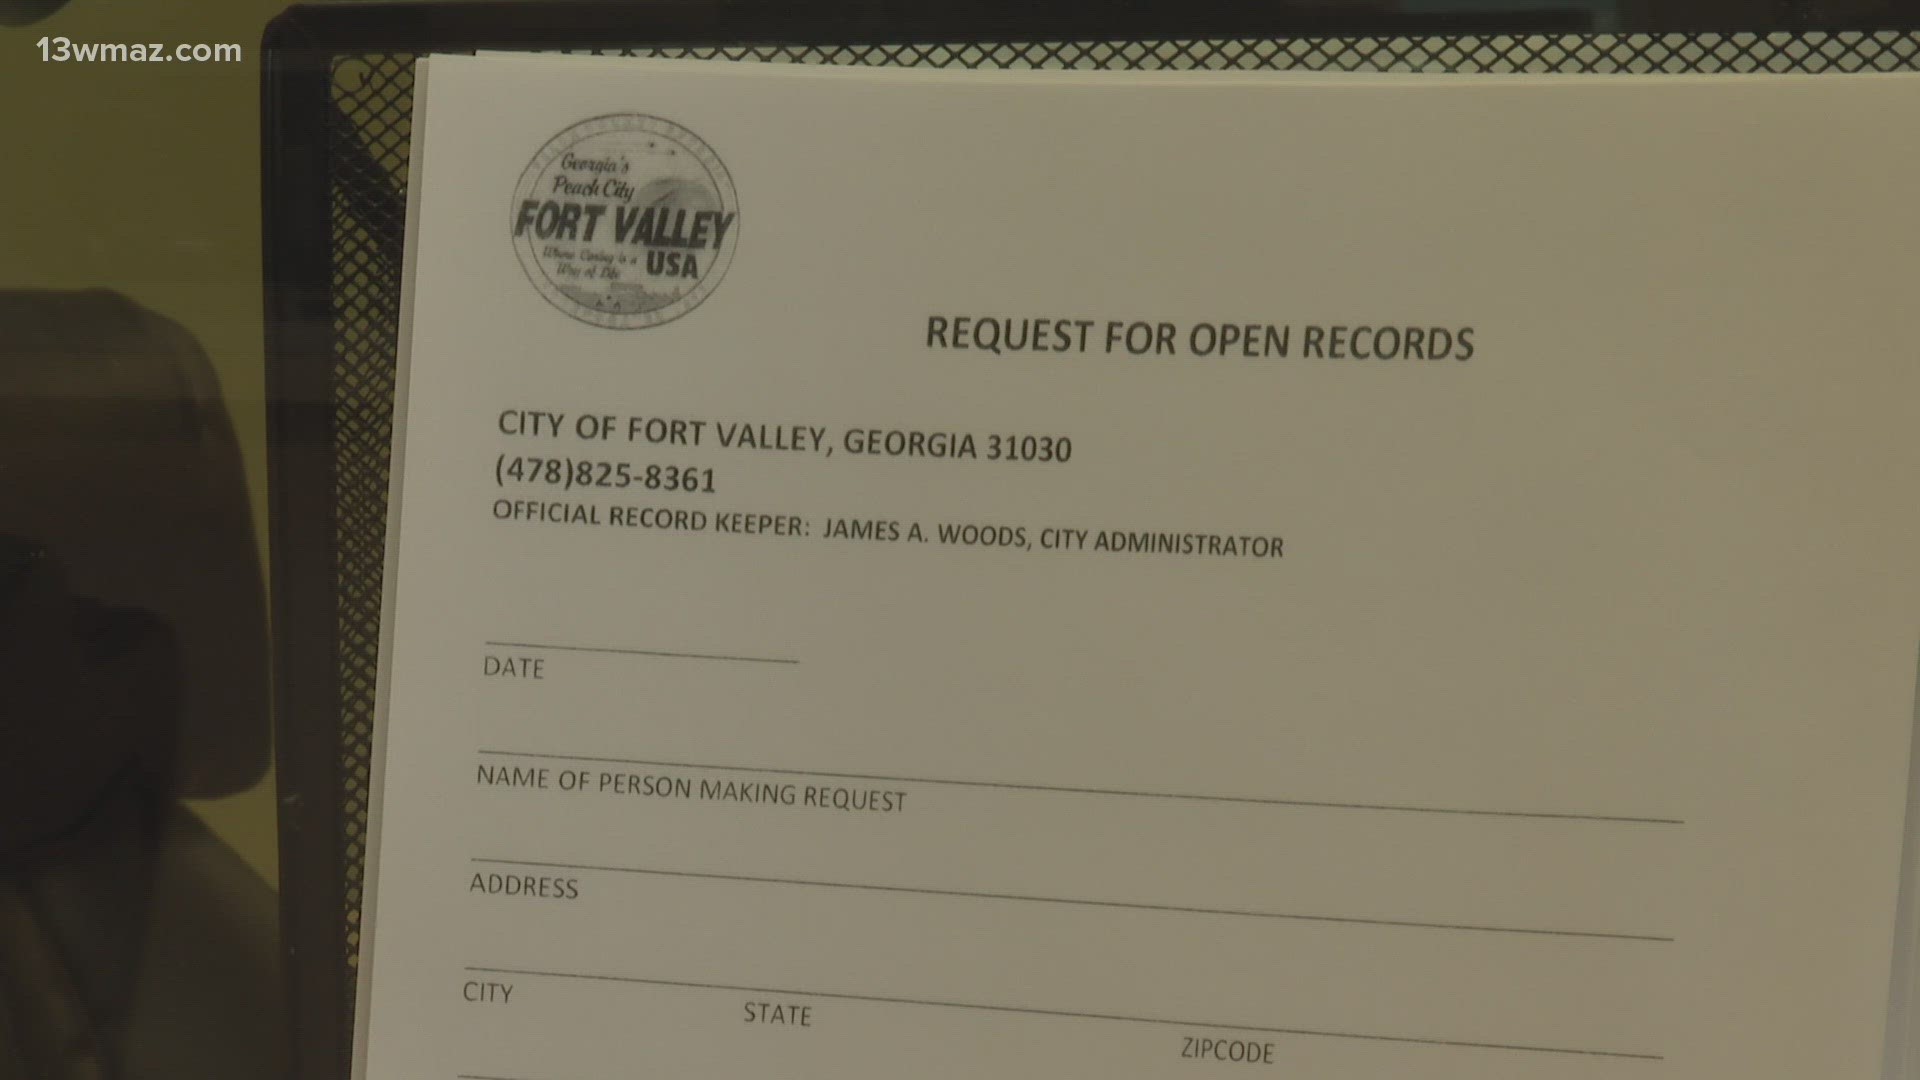 After Jonathan Harris joined Fort Valley as the city administrator, people in the community are asking questions about his criminal background.